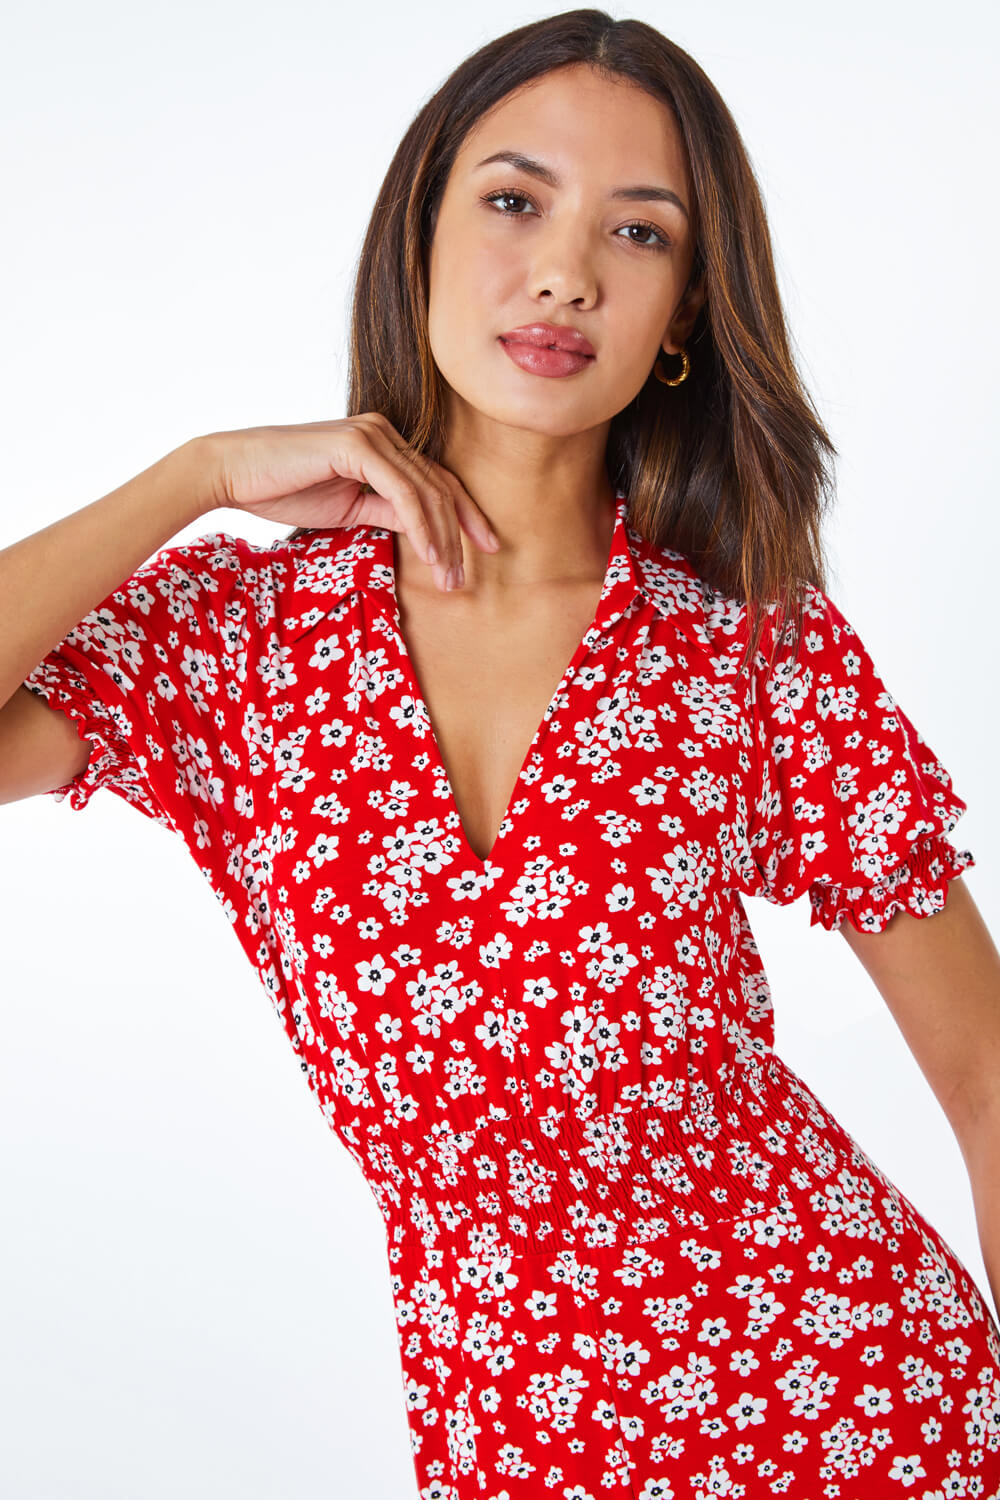 Red Ditsy Floral Print Fit & Flare Dress, Image 4 of 5